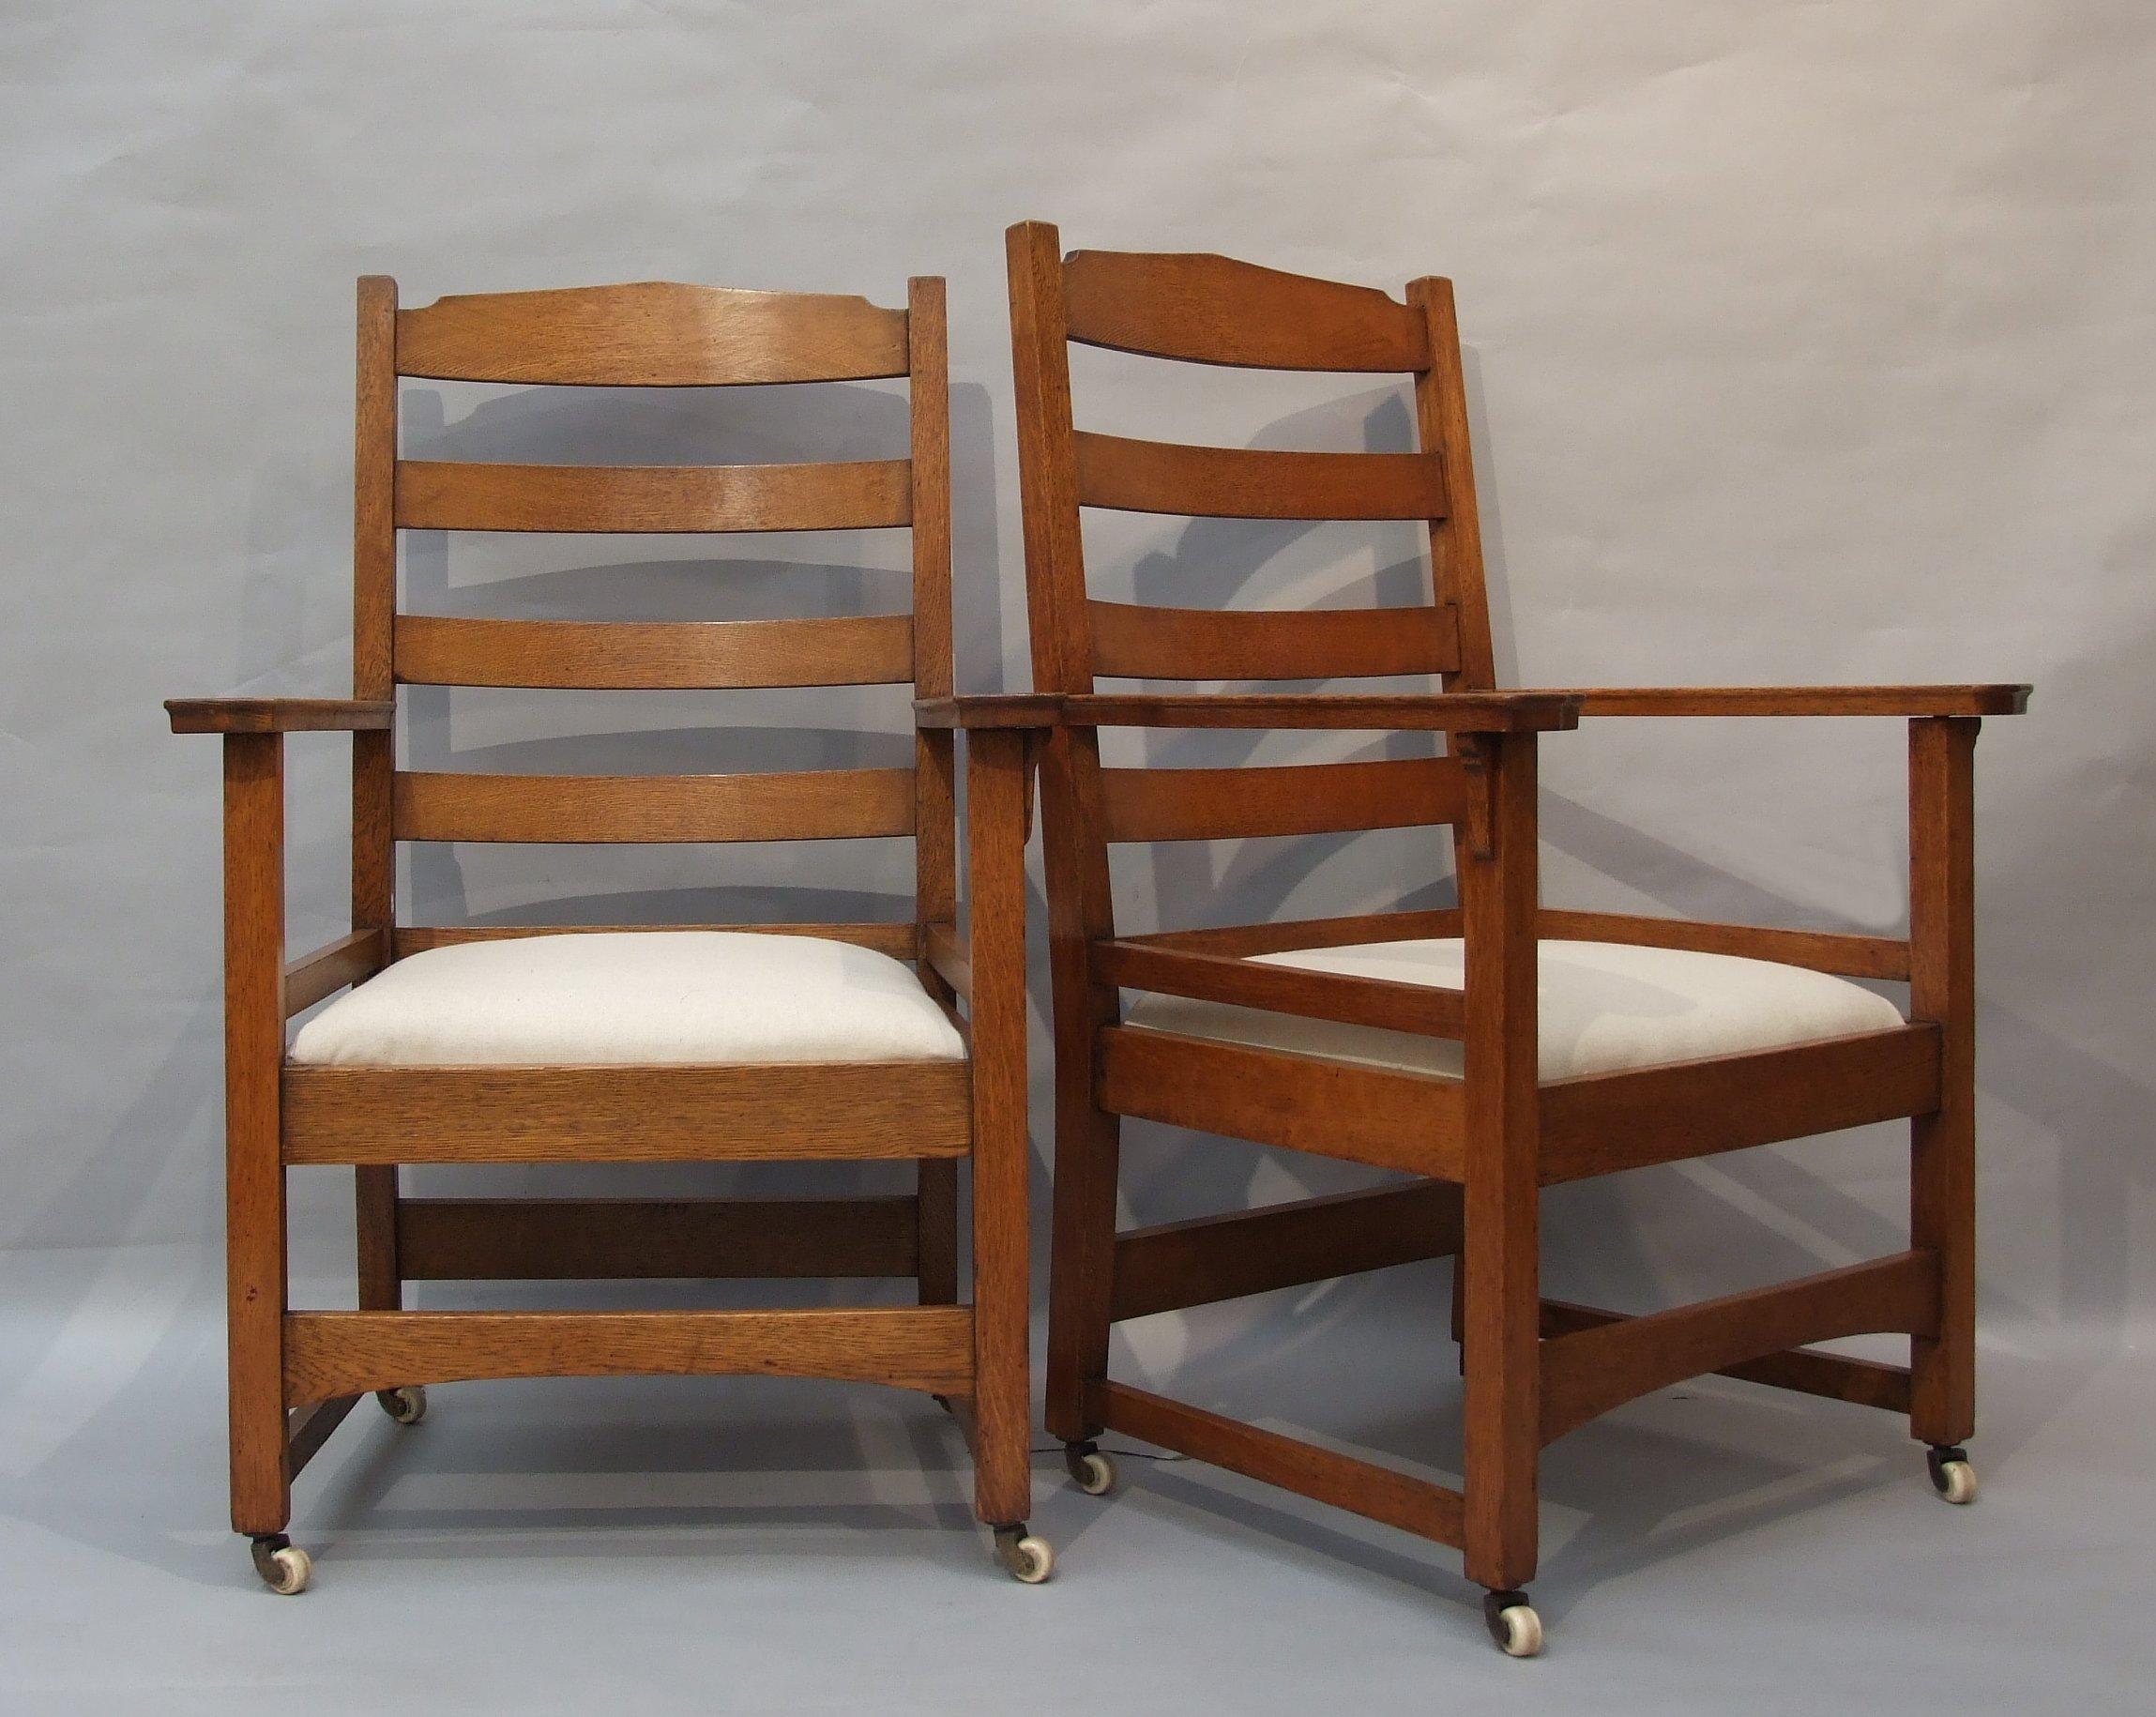 Gustav Stickley a rare set of eight oak American Arts & Crafts ladder-back dining chairs, design no. 965, six sides, two arms, with drop-in seats newly re-upholstered in 100% linen, on period porcelain castors to the legs, designed in 1902, made by